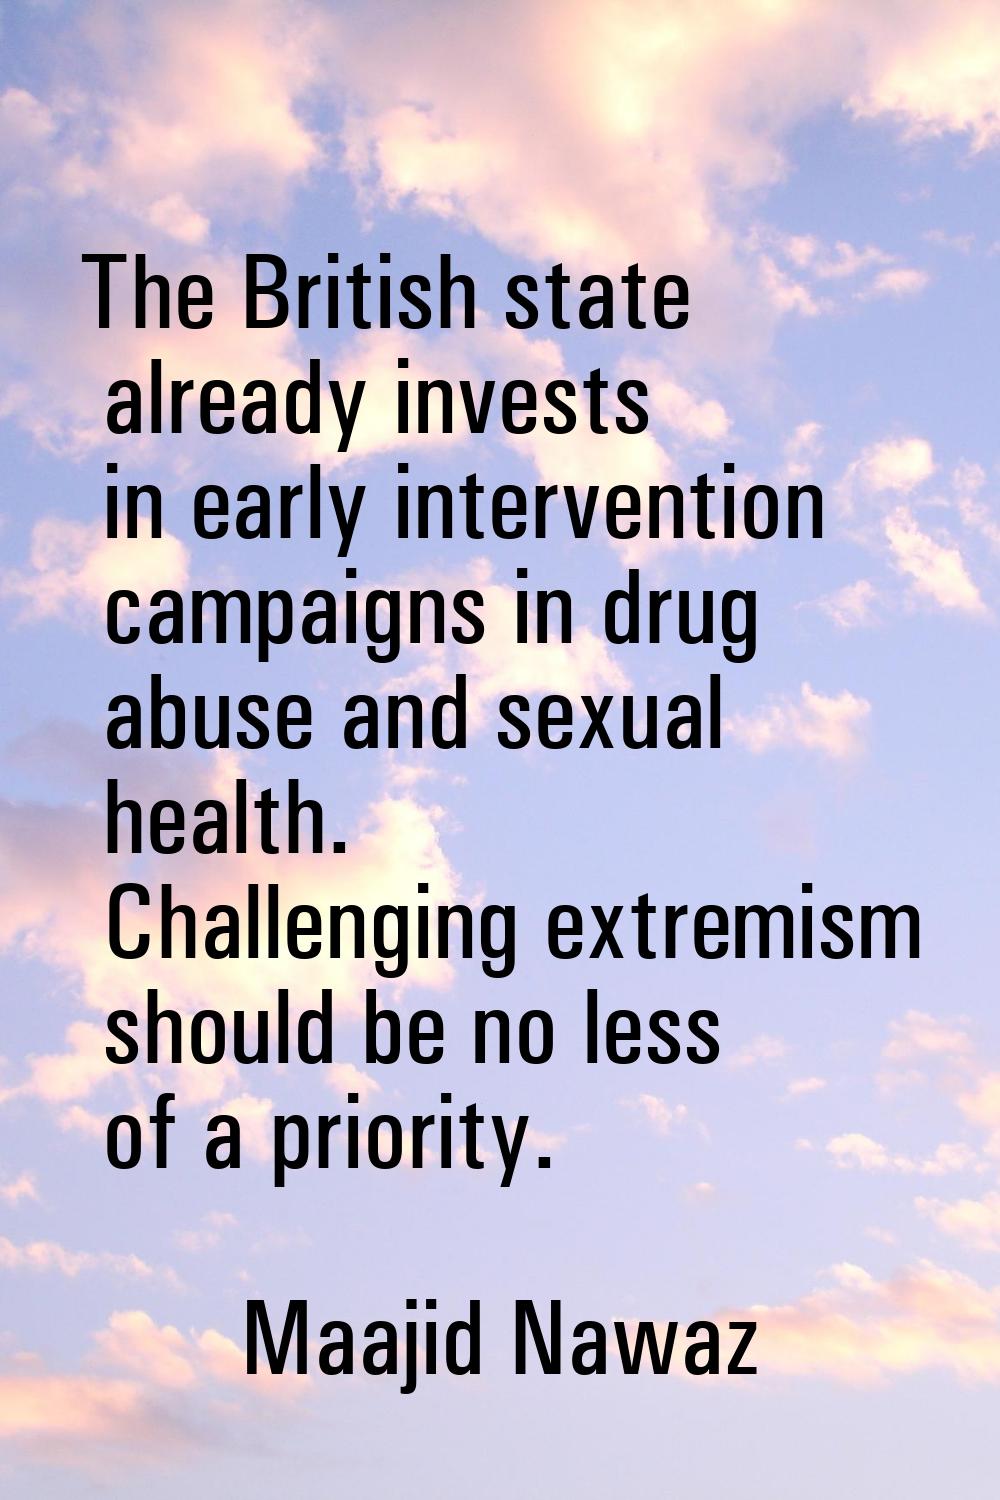 The British state already invests in early intervention campaigns in drug abuse and sexual health. 